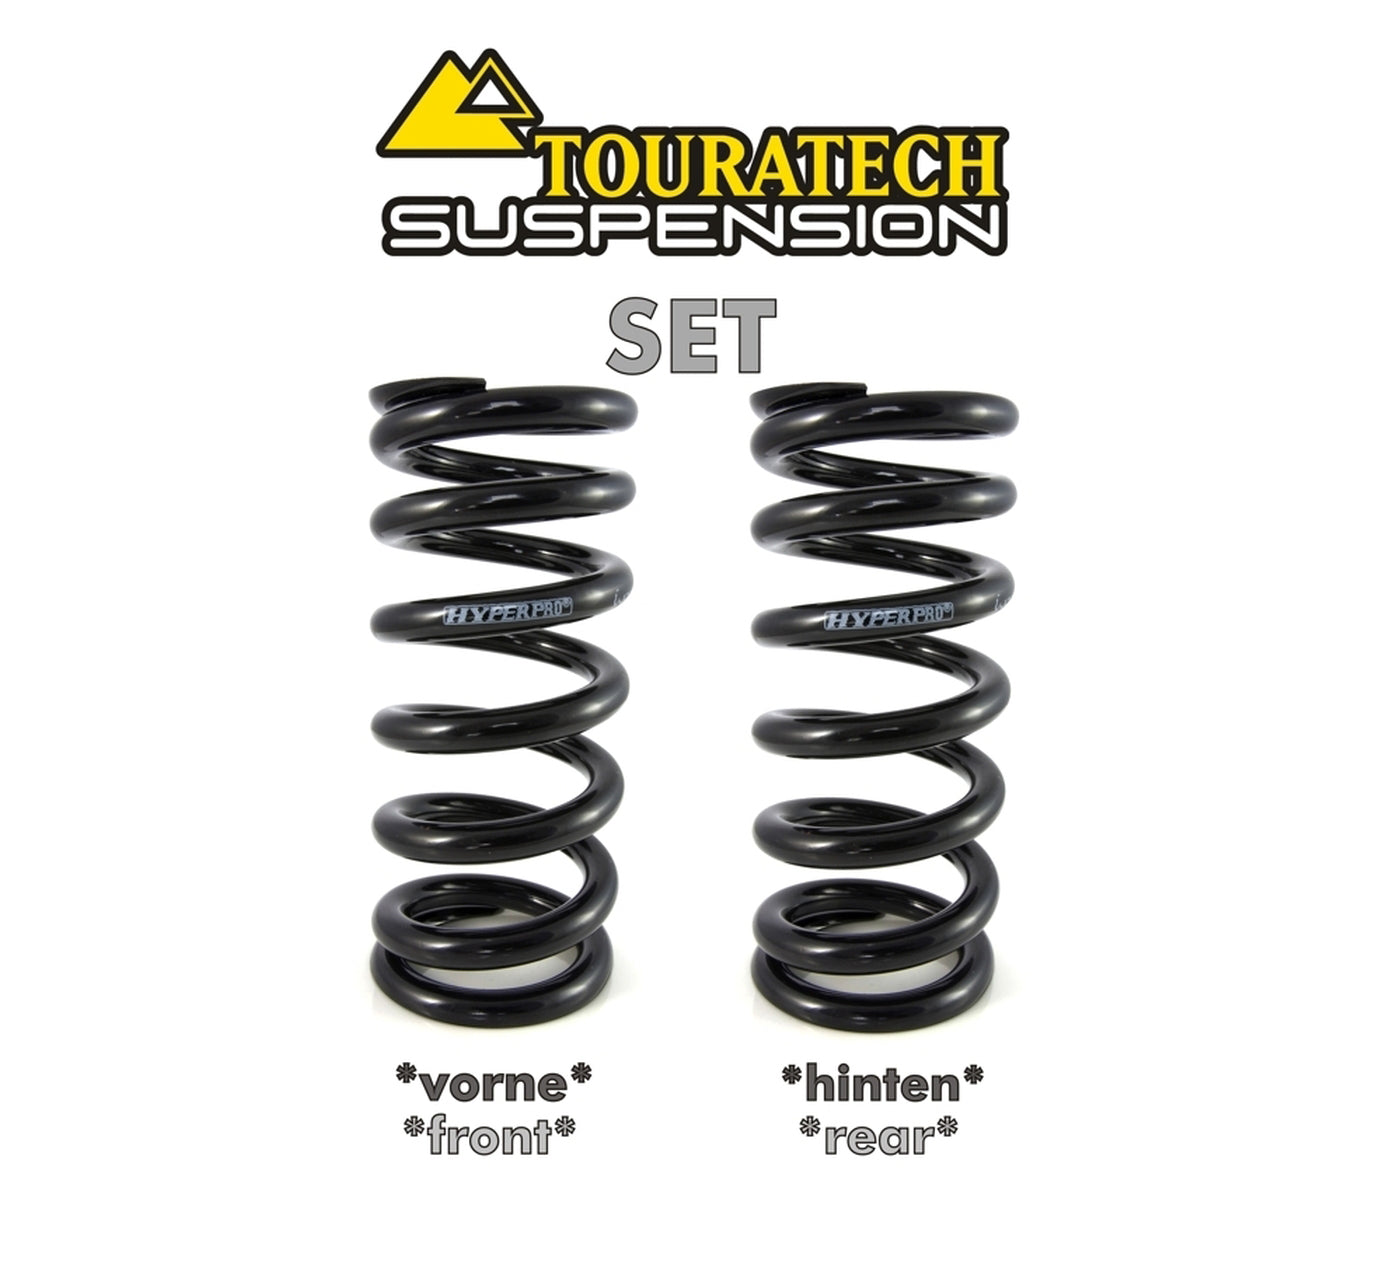 Touratech Suspension progressive replacement springs for BMW R 1150 R 2001 - 2006